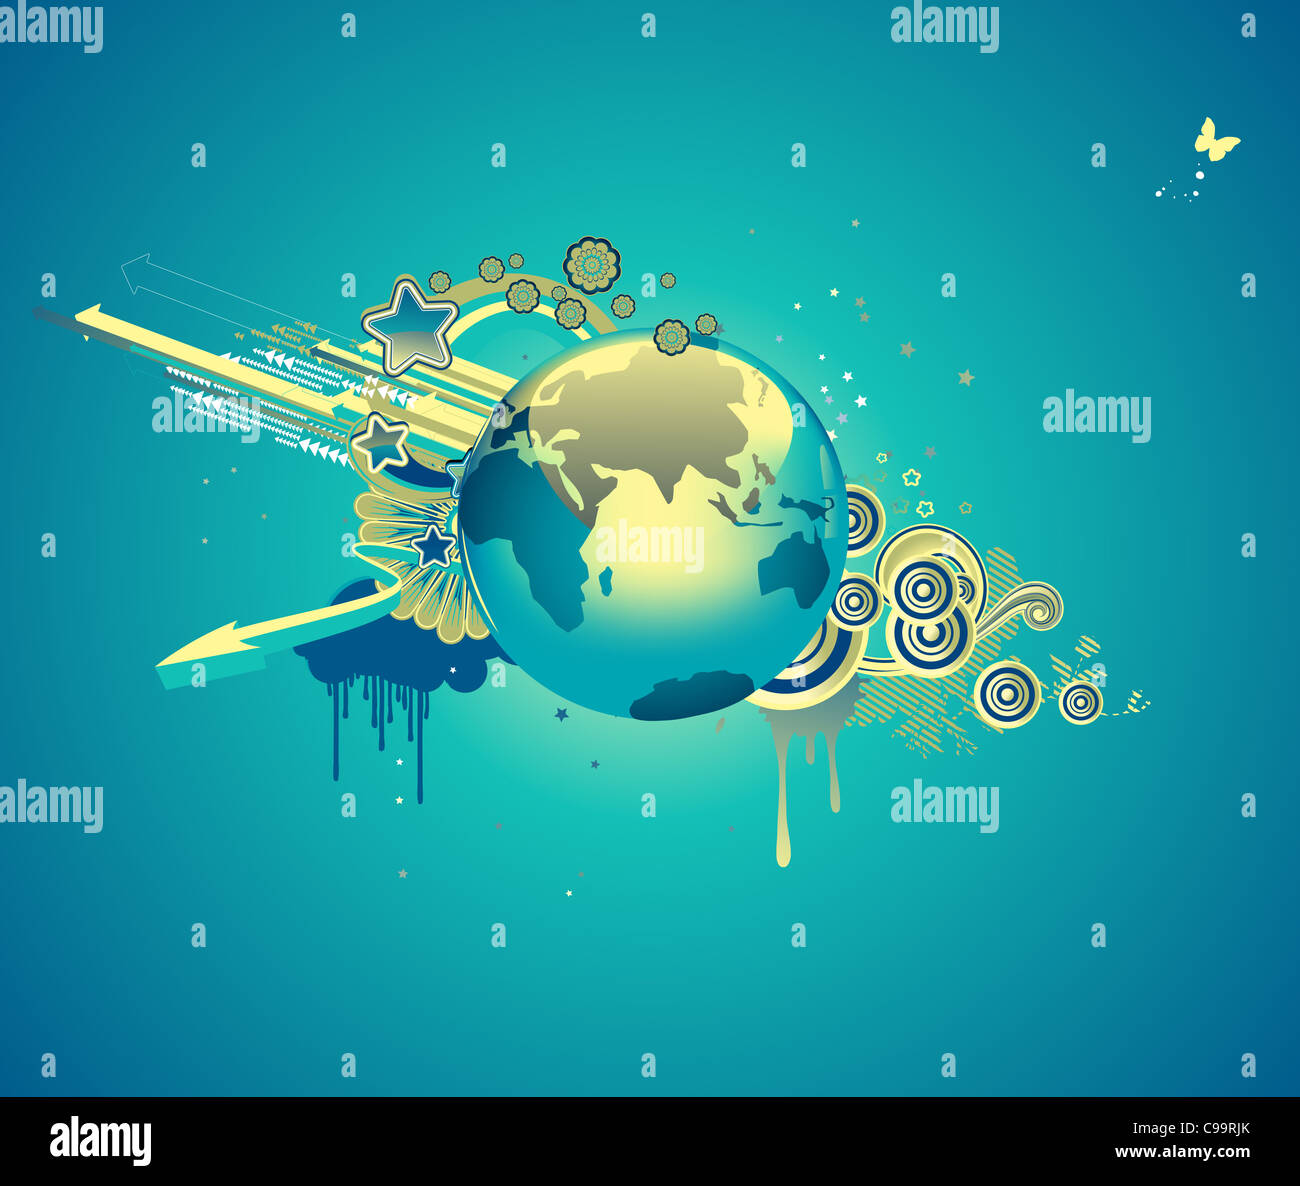 illustration of funky abstract background with globe, flowers, arrows and circles Stock Photo